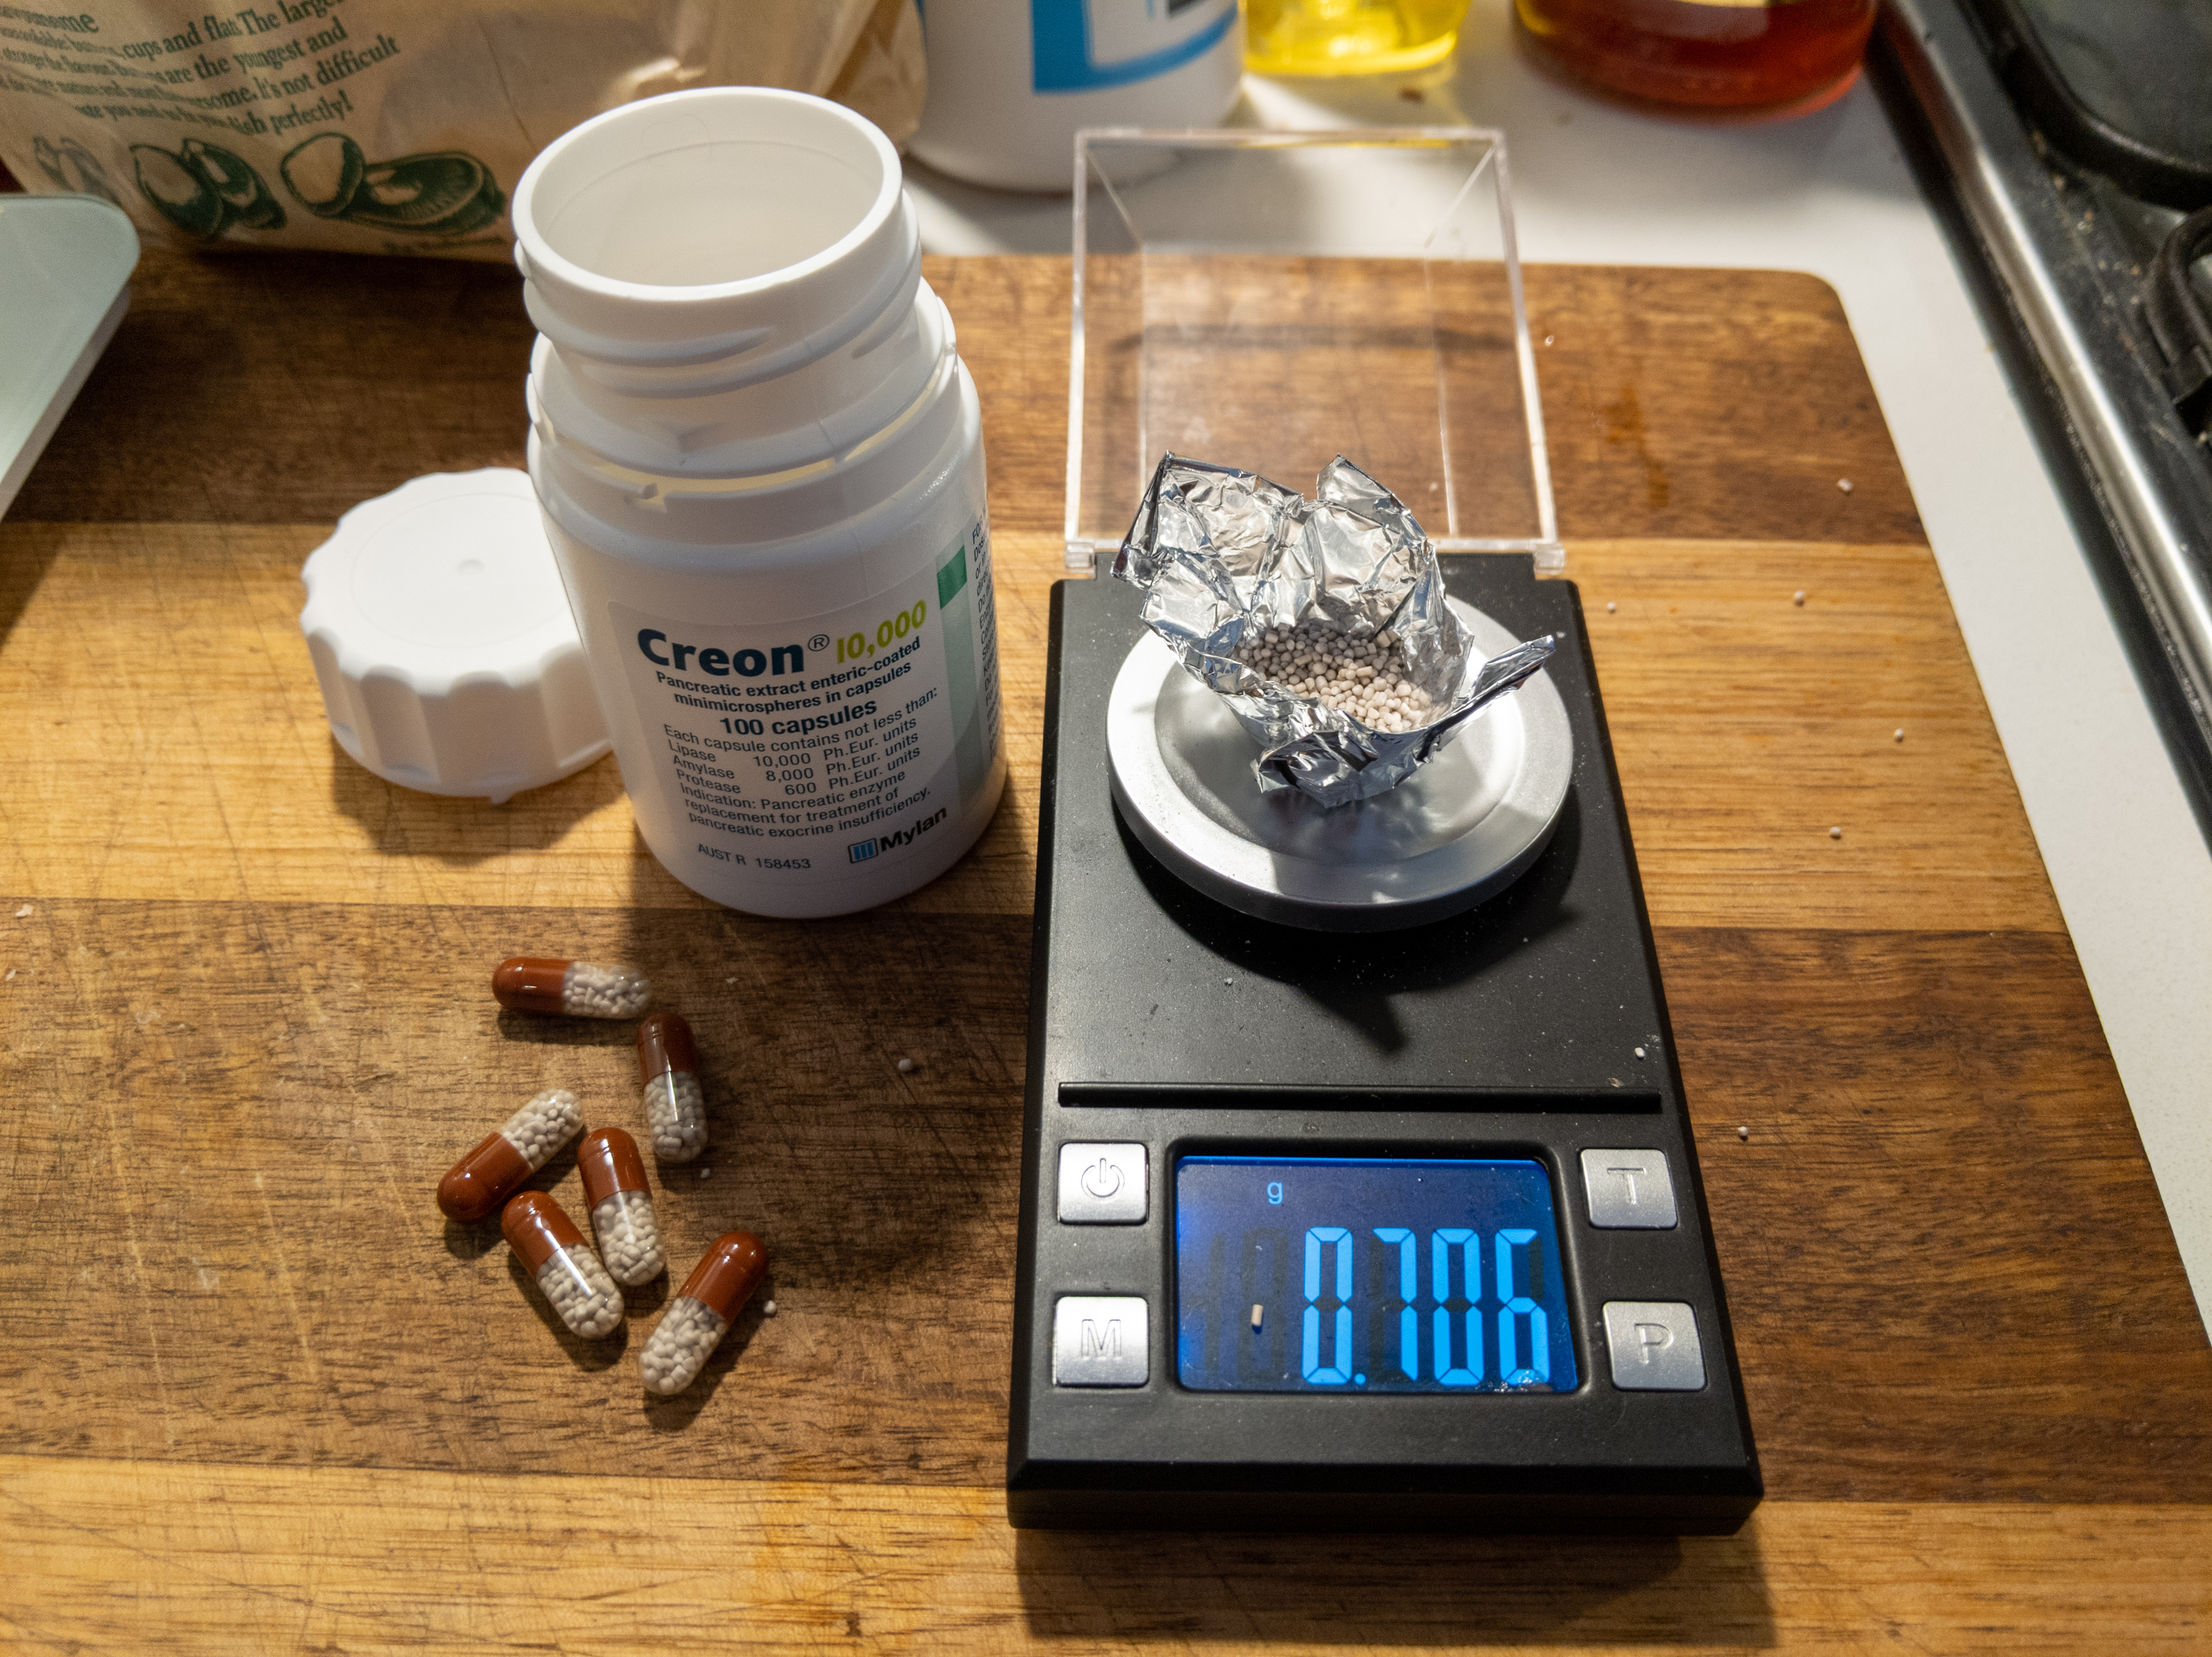 A picture of a small scale with a foil 'boat' on it, with some powder in it. Next to the scale are some gel capsules and a pill bottle